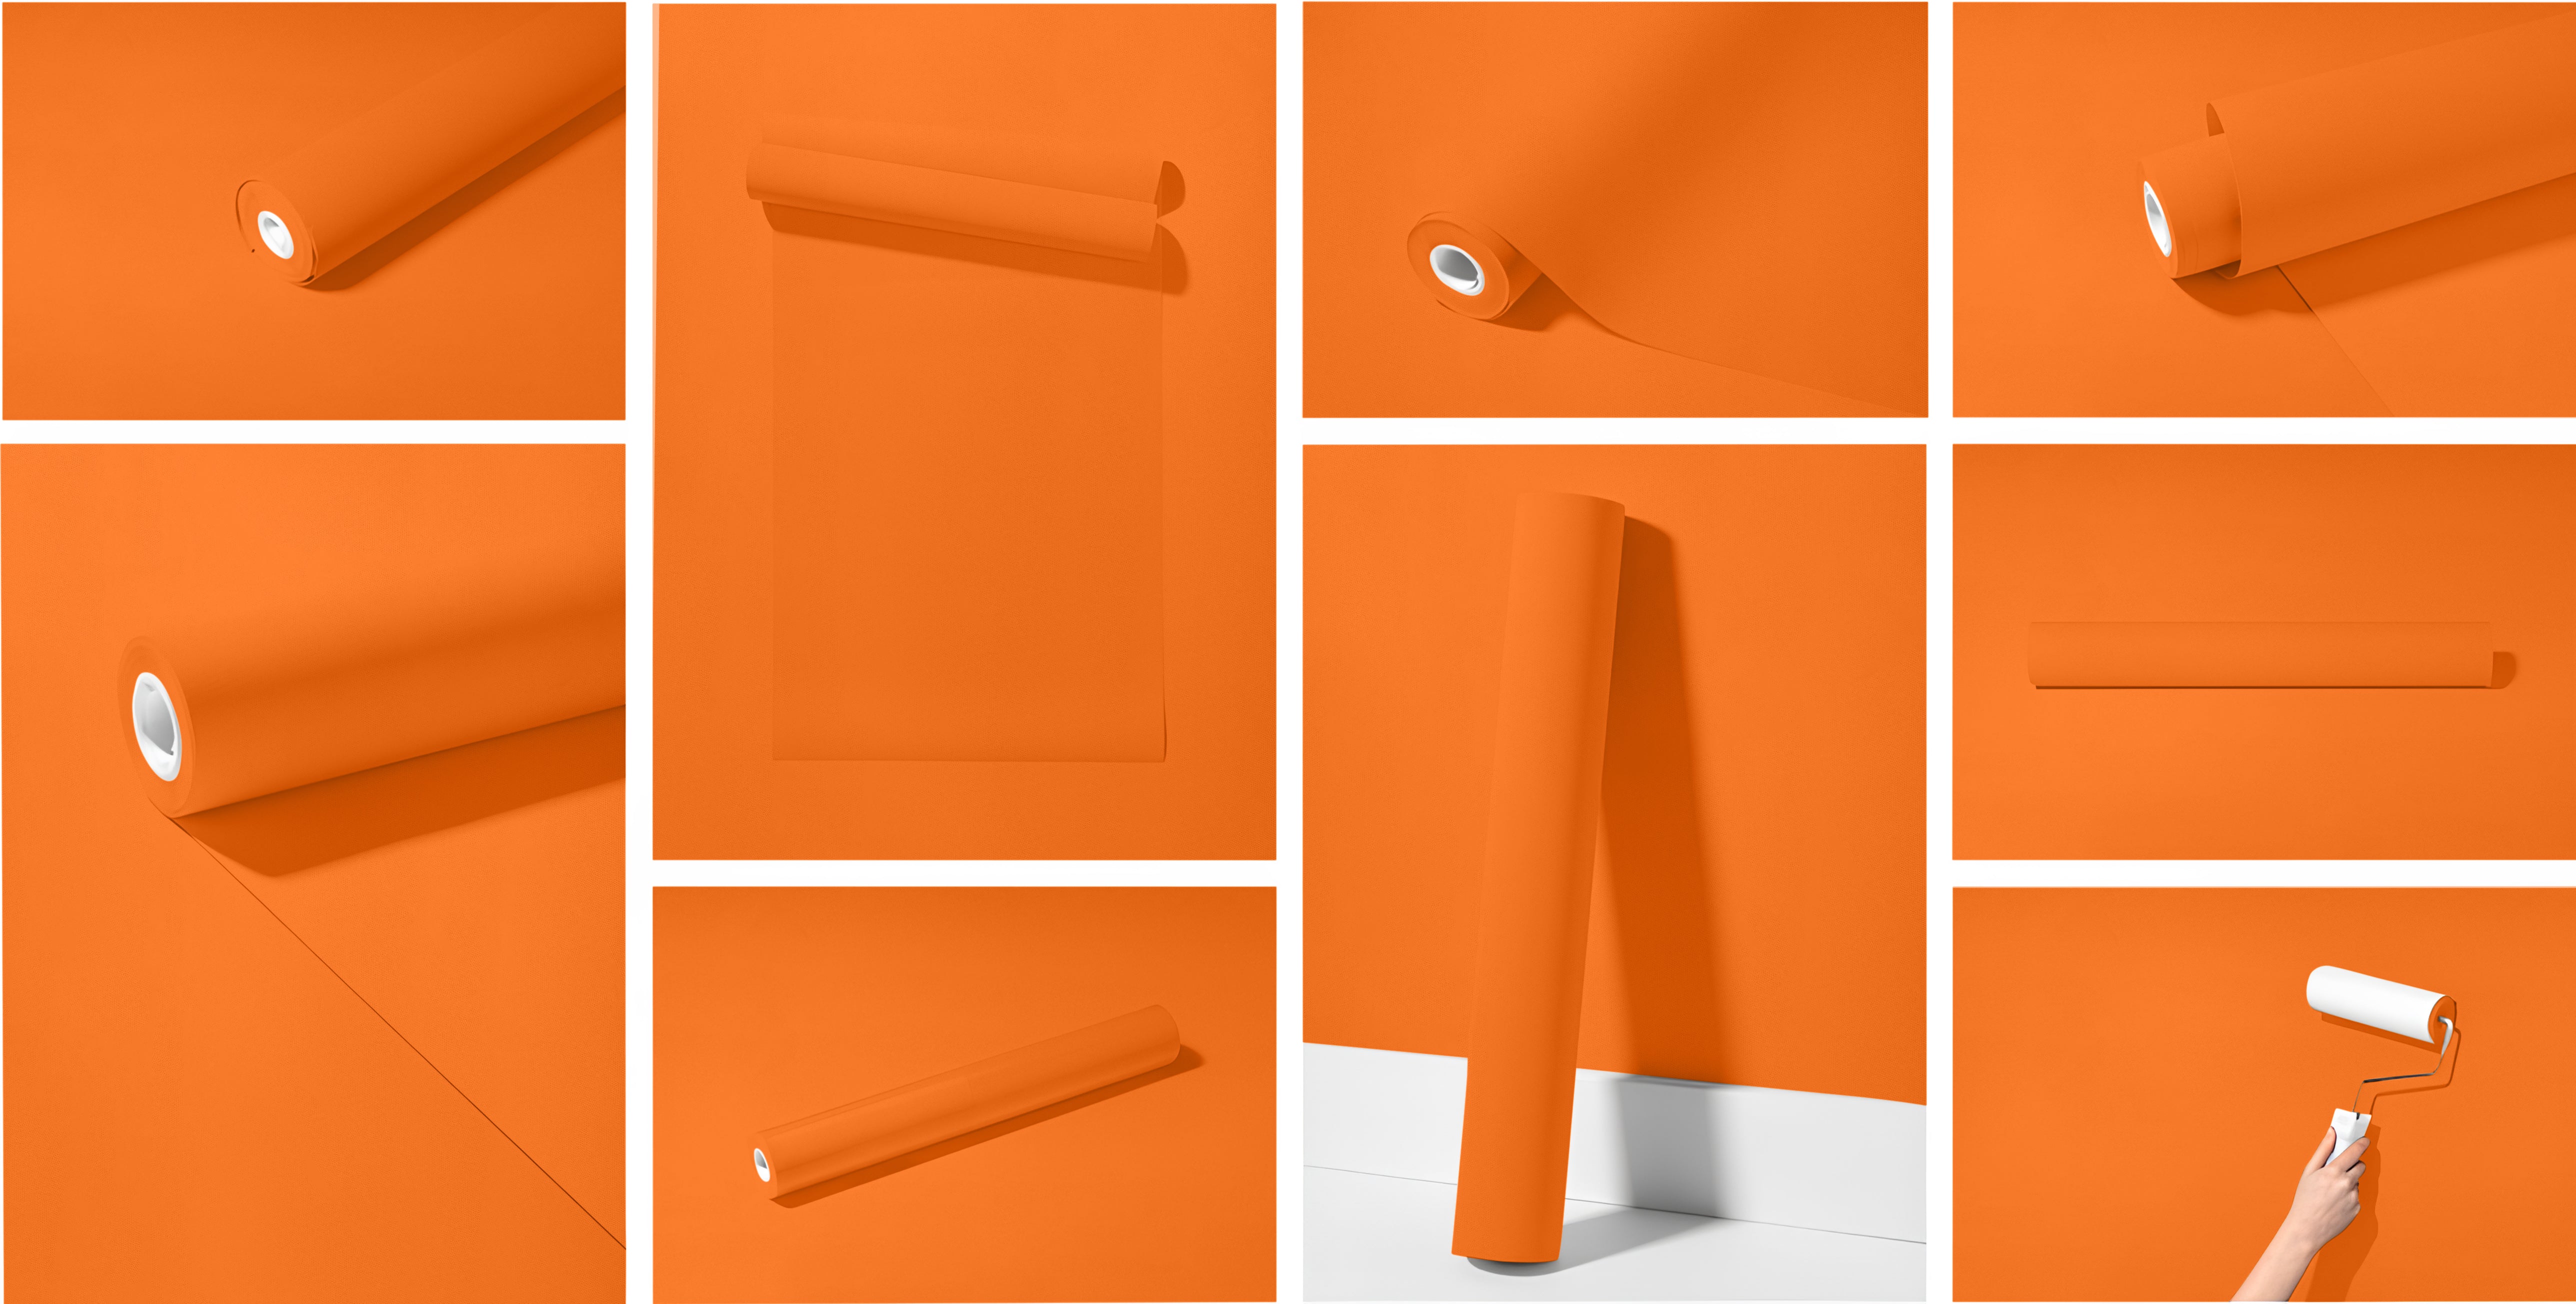 Peel & Stick Removable Re-usable Paint - Color RAL 2003 Pastel Orange - offRAL™ - RALRAW LLC, USA